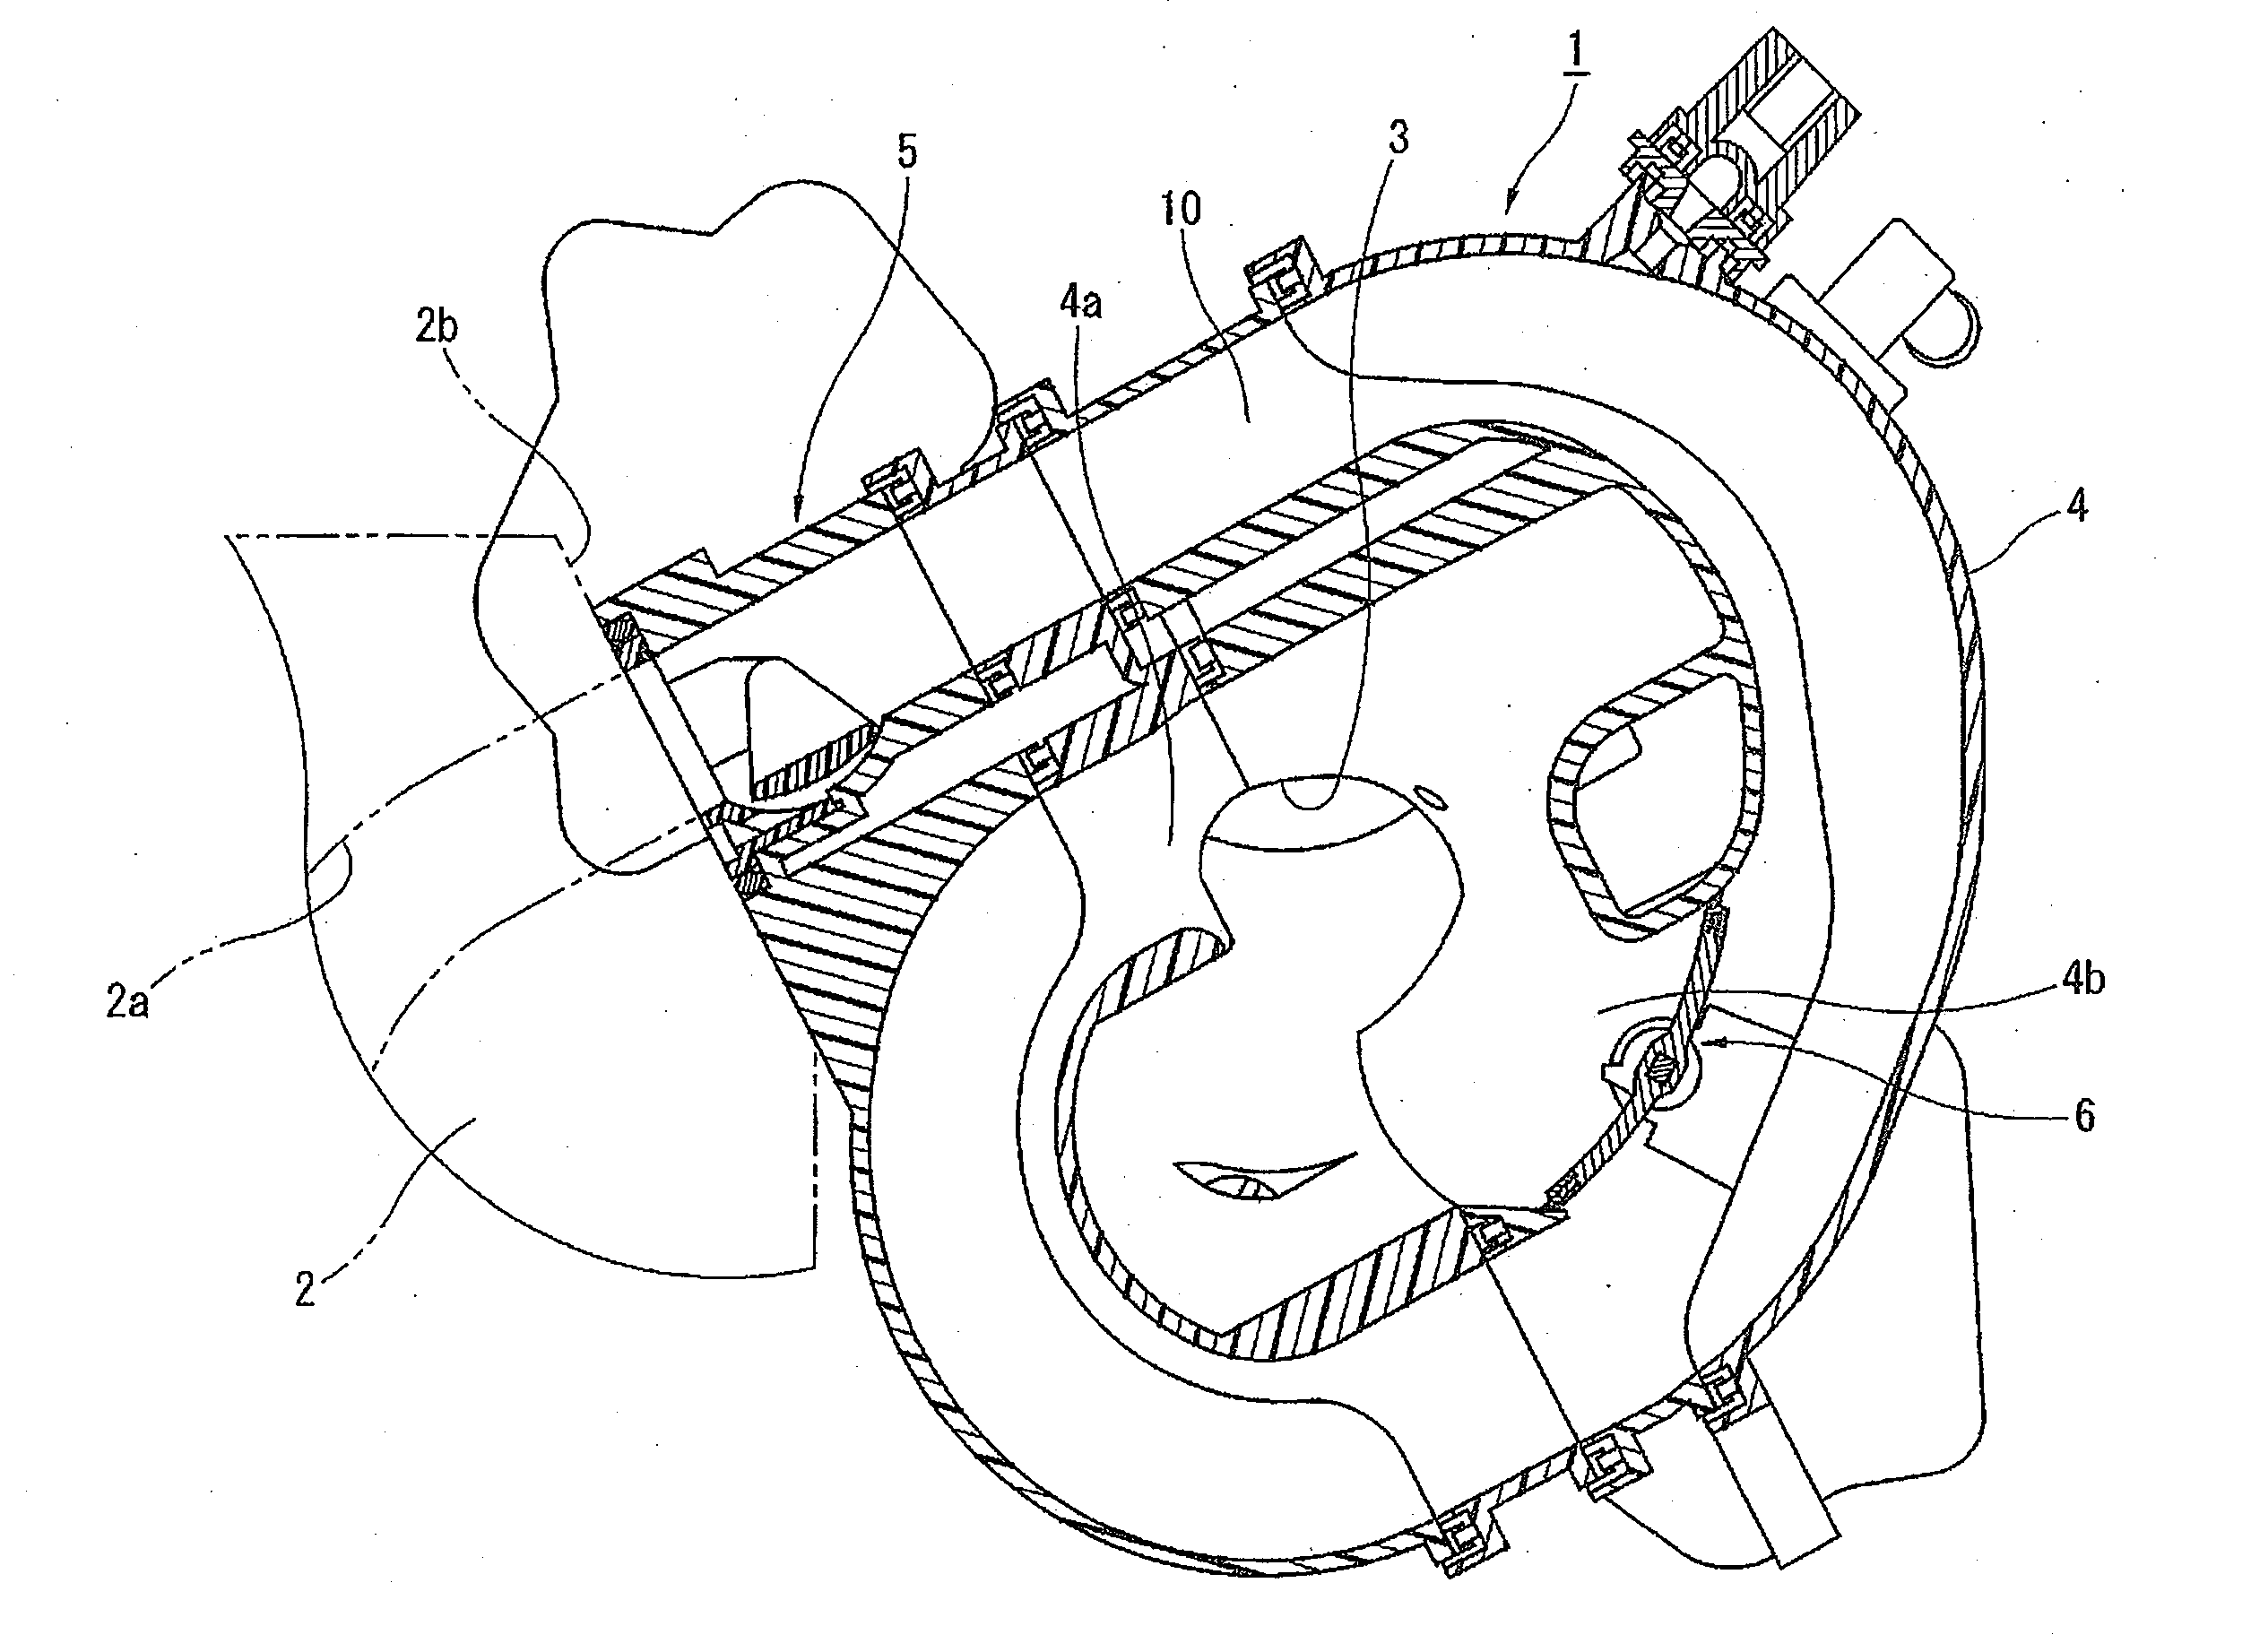 Air intake system for internal combustion engine